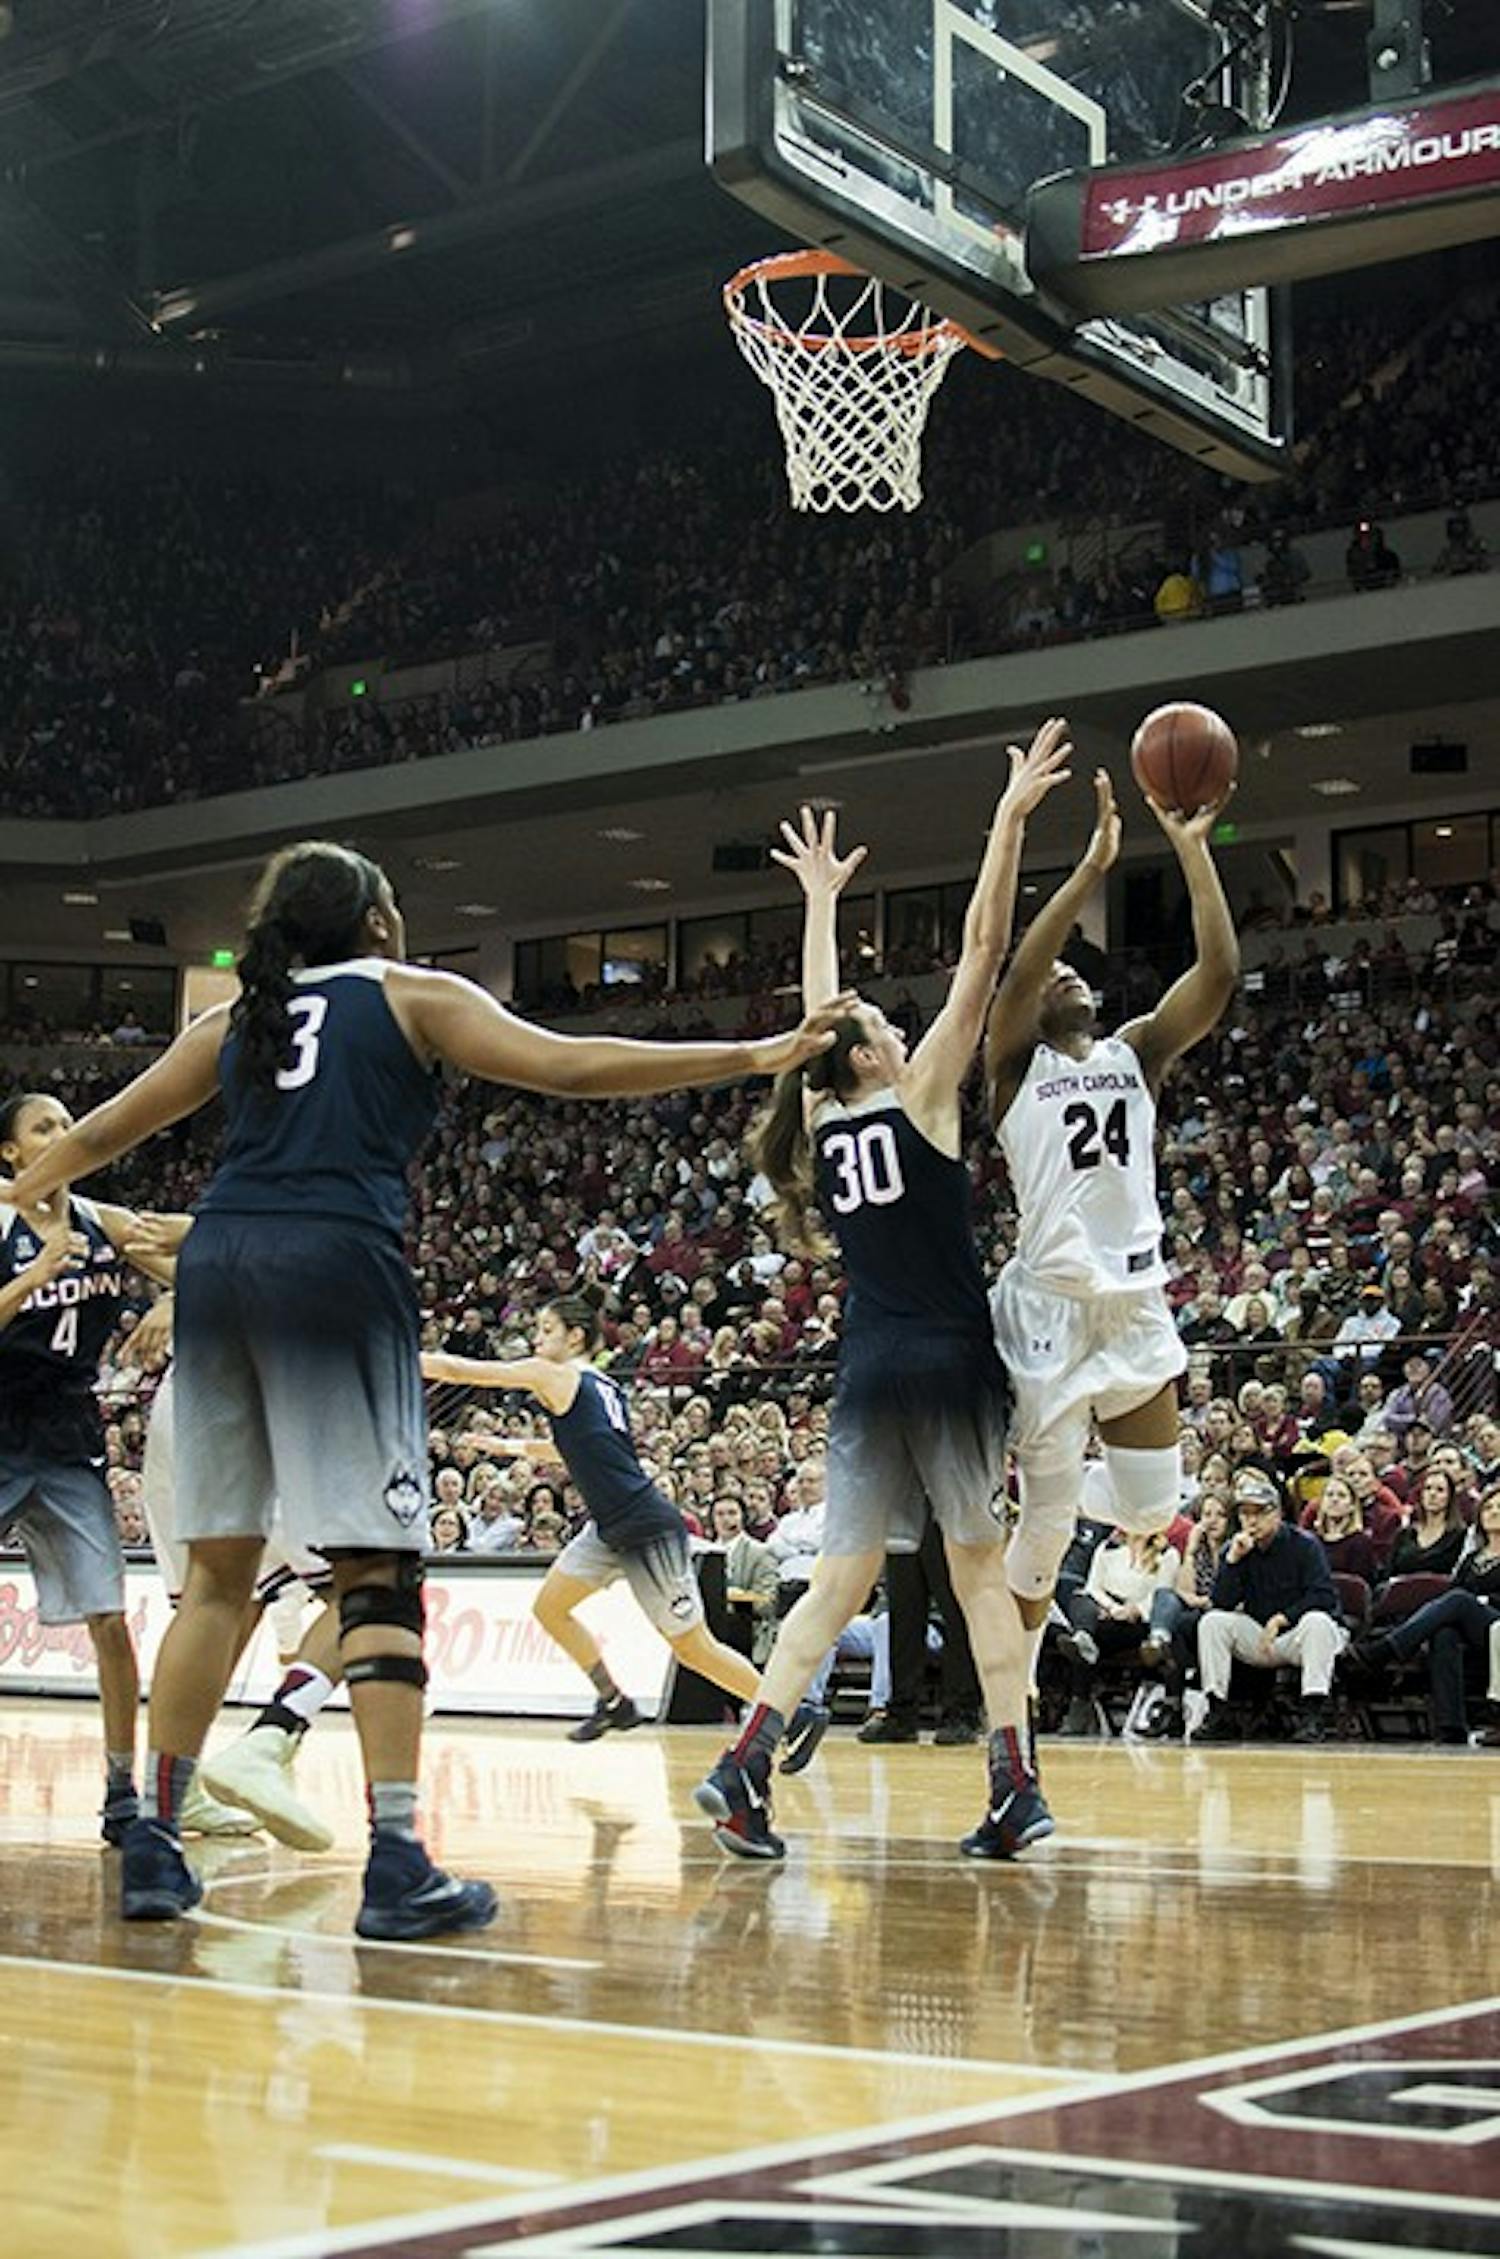 Sarah Imovbioh faces Breanna Stewart, one of UConn's best players. Despite UConn having a strong defense, the Gamecocks prevailed, sinking shots as often as they could. 